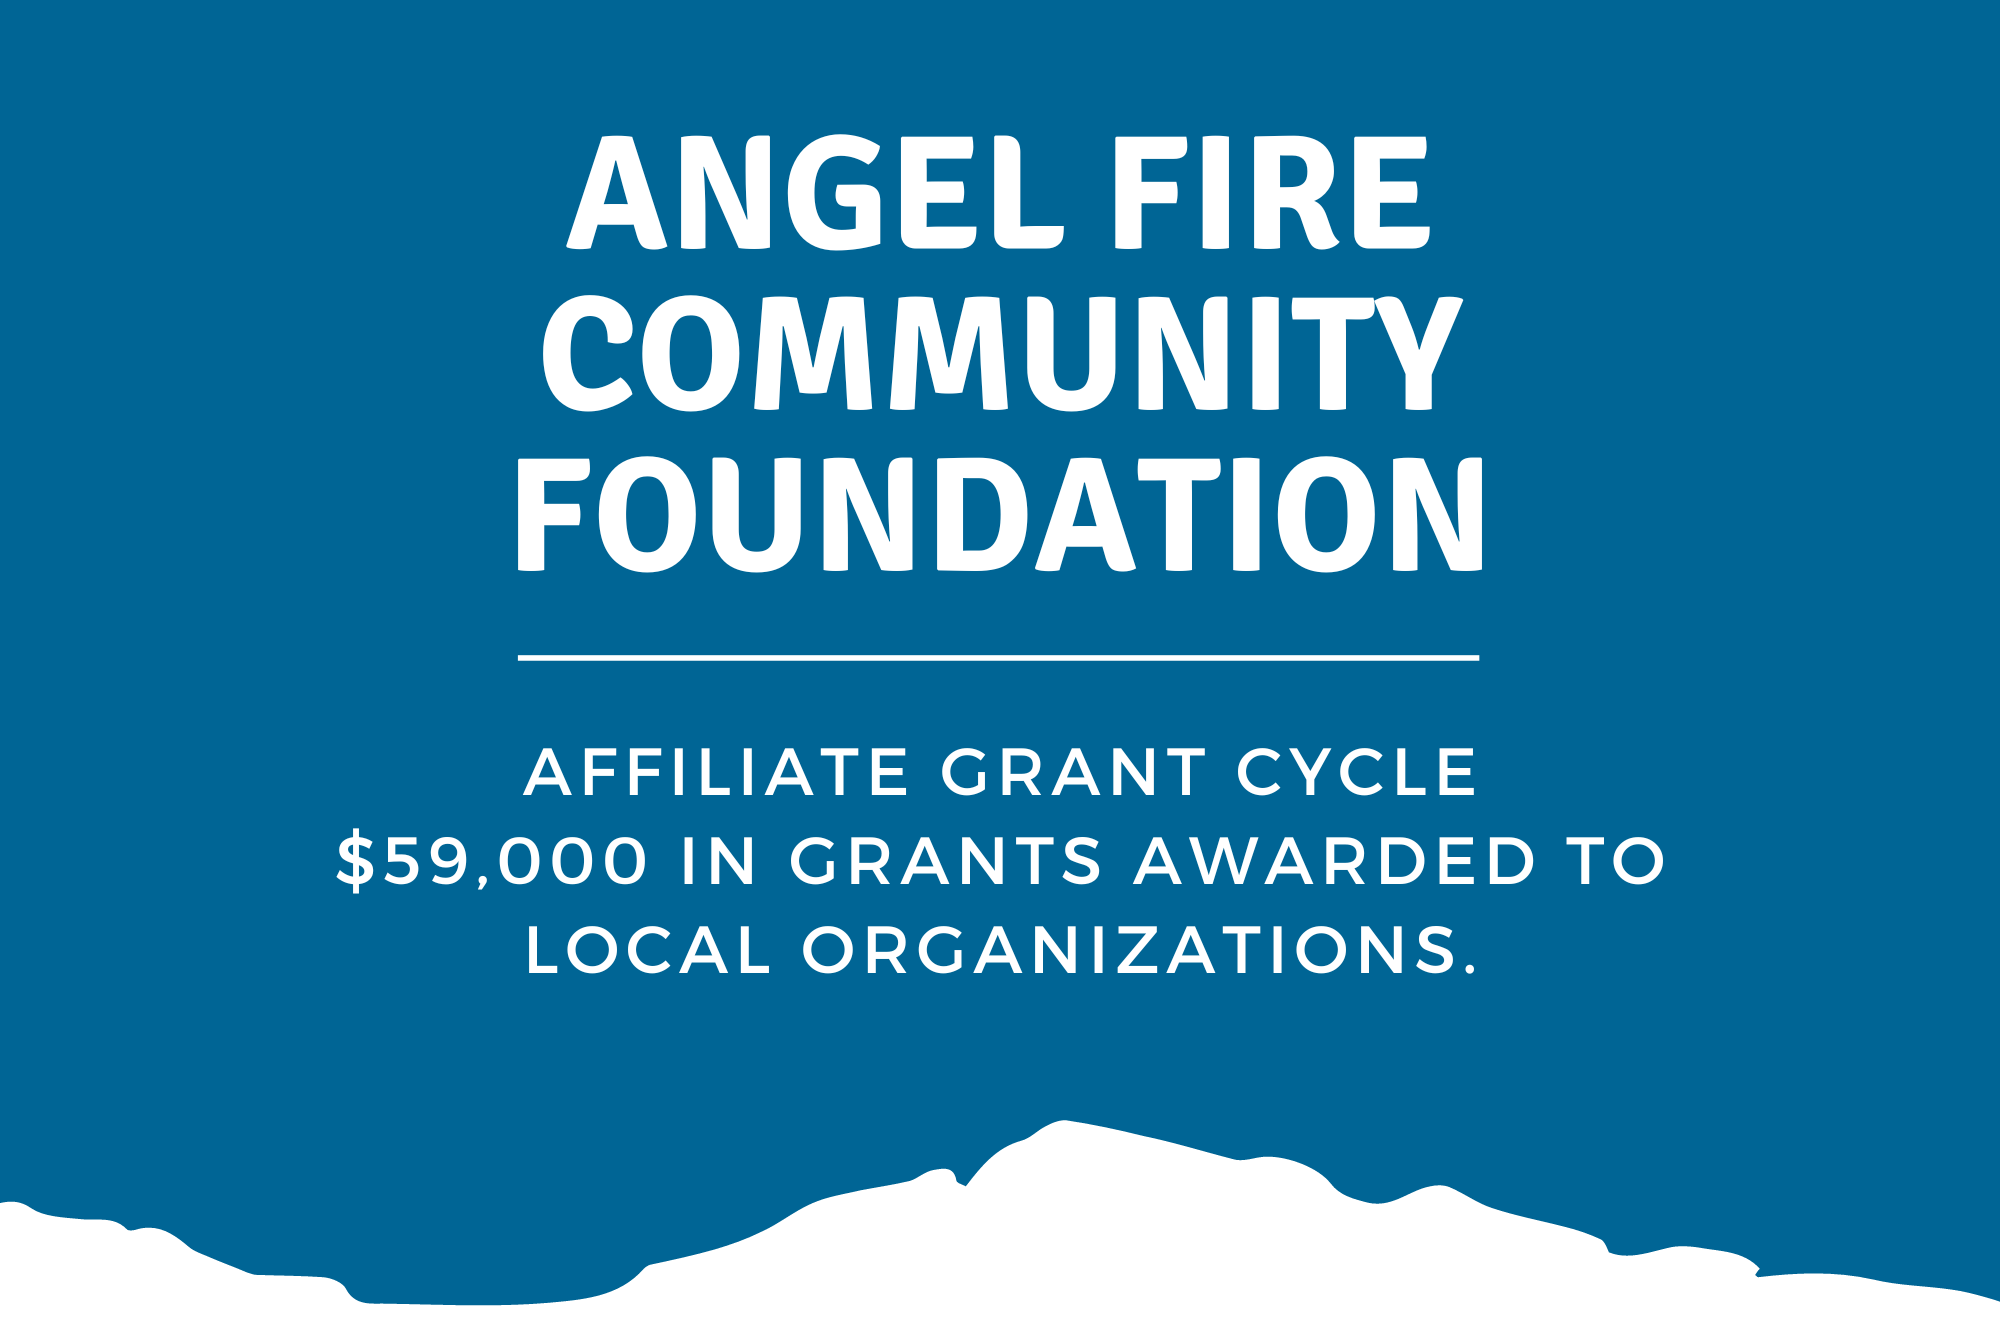 Angel Fire Community Foundation: Affiliate Grant Cycle. $59,000 in Grants Awarded to local organizations.